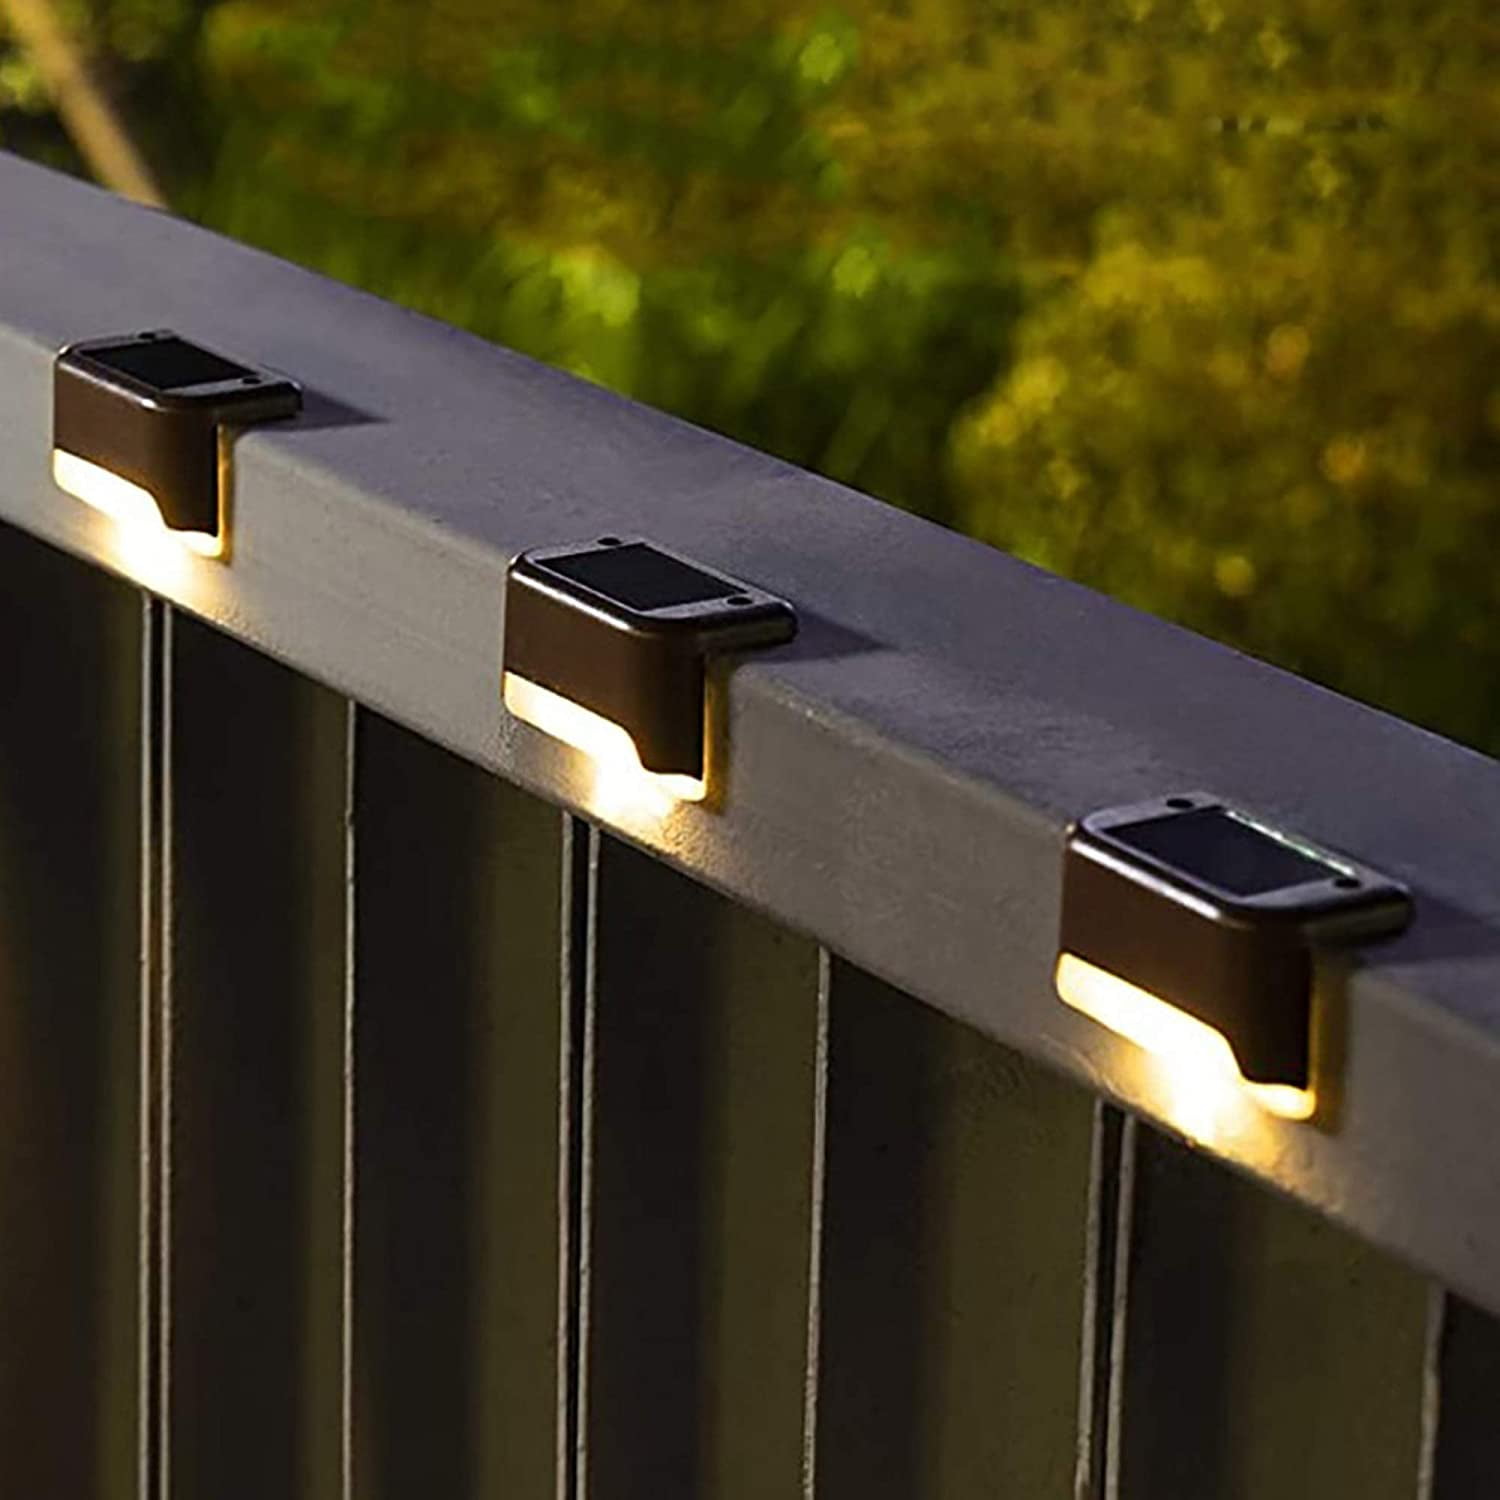 CA Solar Powered Outdoor 6 LED Waterproof Wall Garden Fence Security Pathway